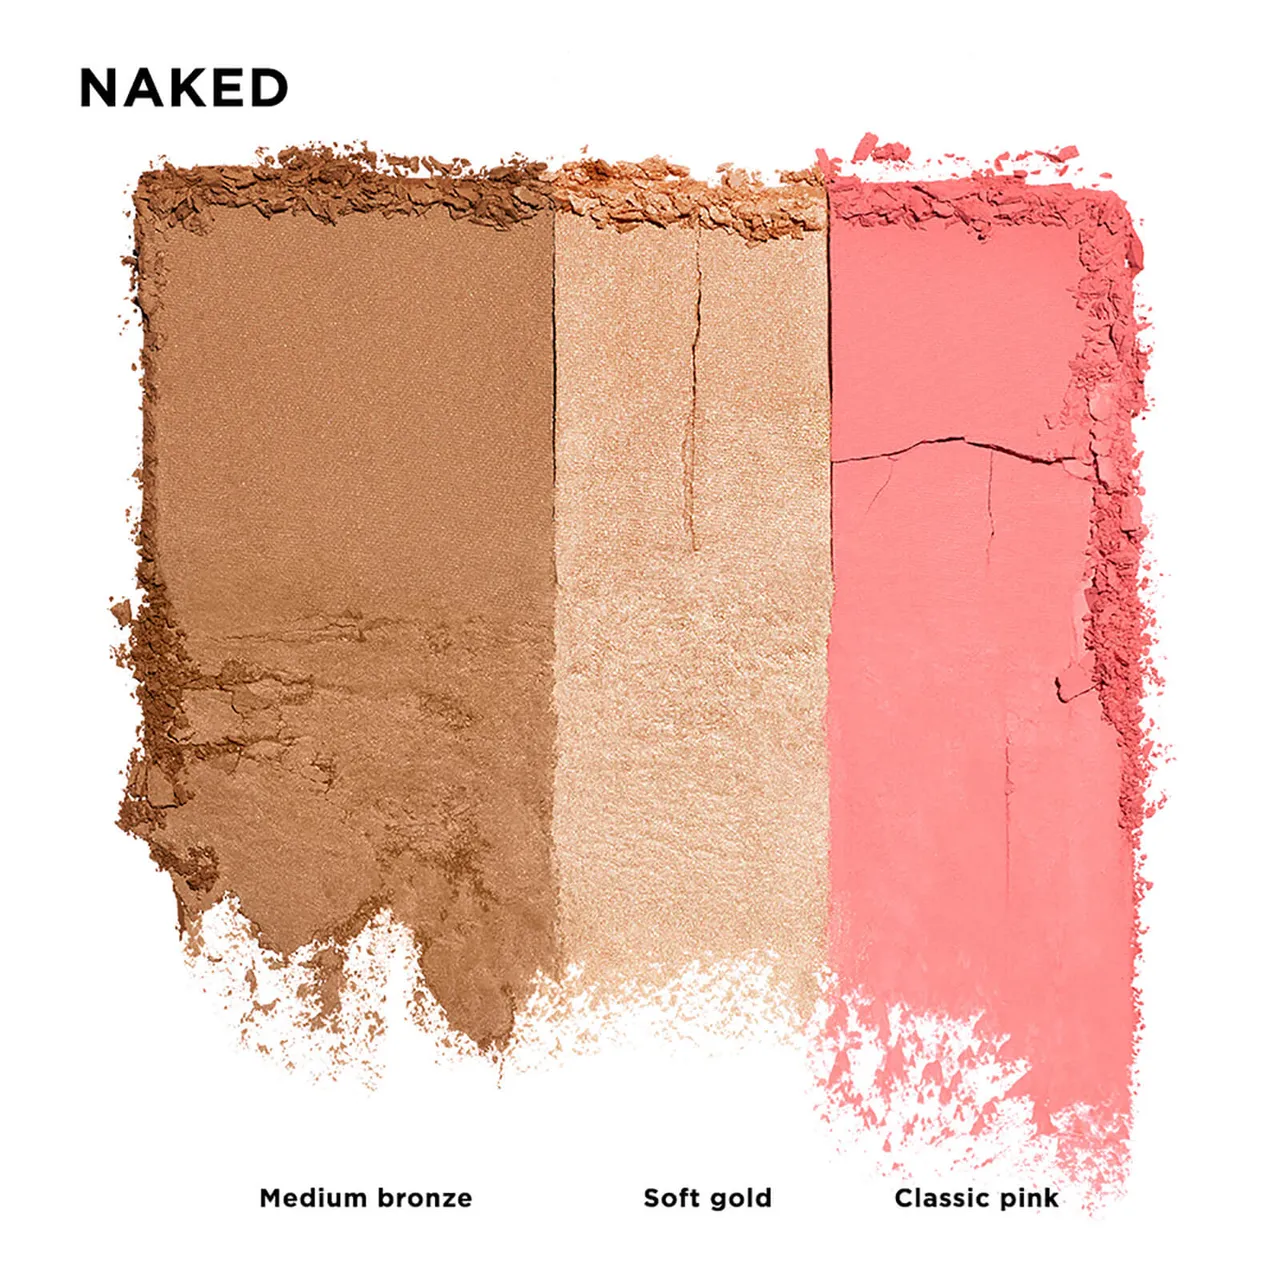 Urban Decay Stay Naked Threesome Palette - Naked 115g